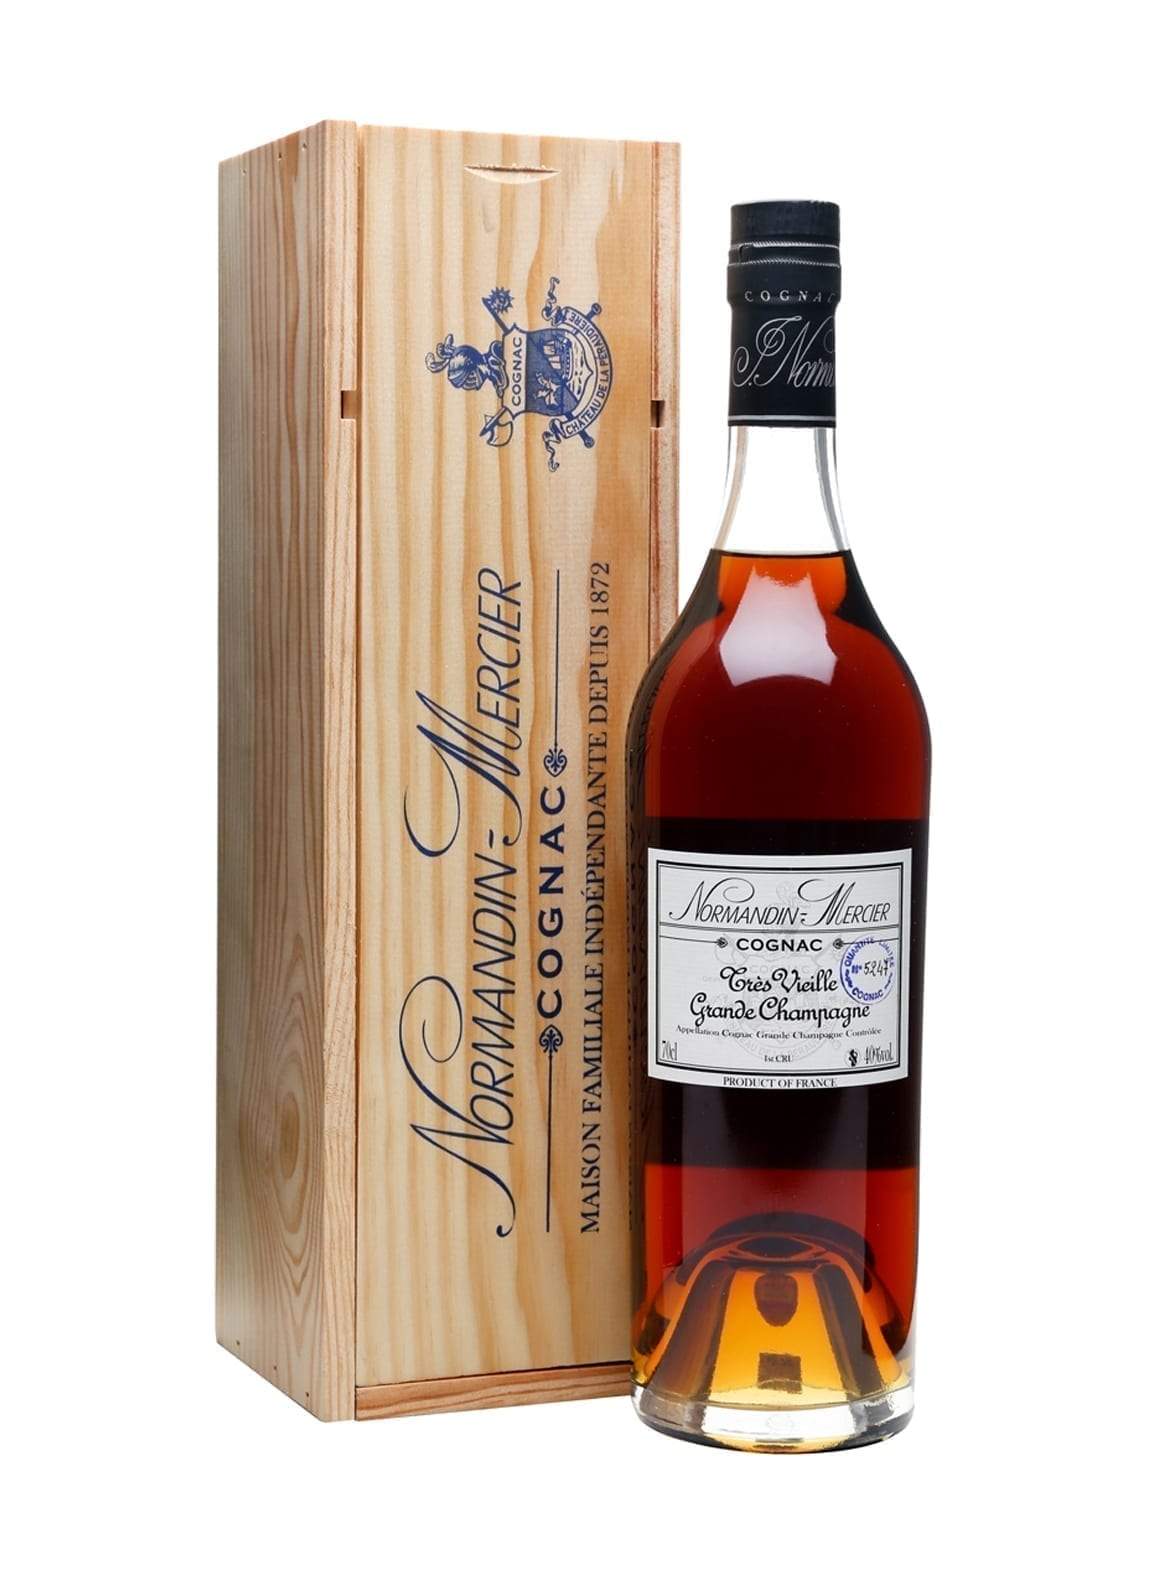 Normandin-Mercier Cognac Tres Vieille 100 years+ (1880-1914) Grand Champagne 40% 700ml | Brandy | Shop online at Spirits of France